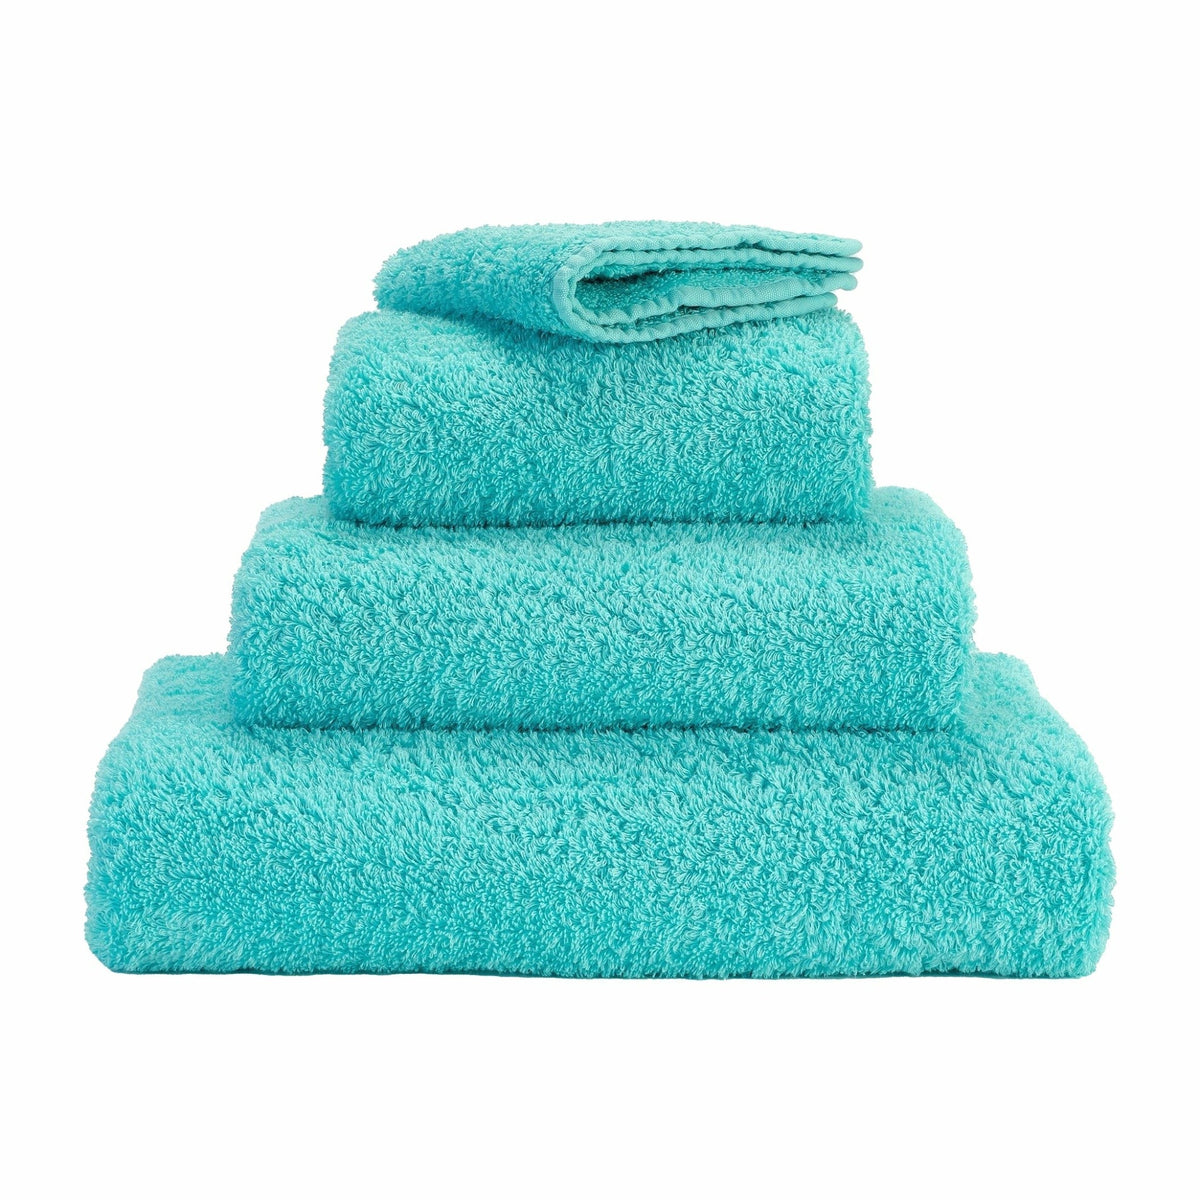 Abyss Double Bath Tub Mat - Turquoise (370)